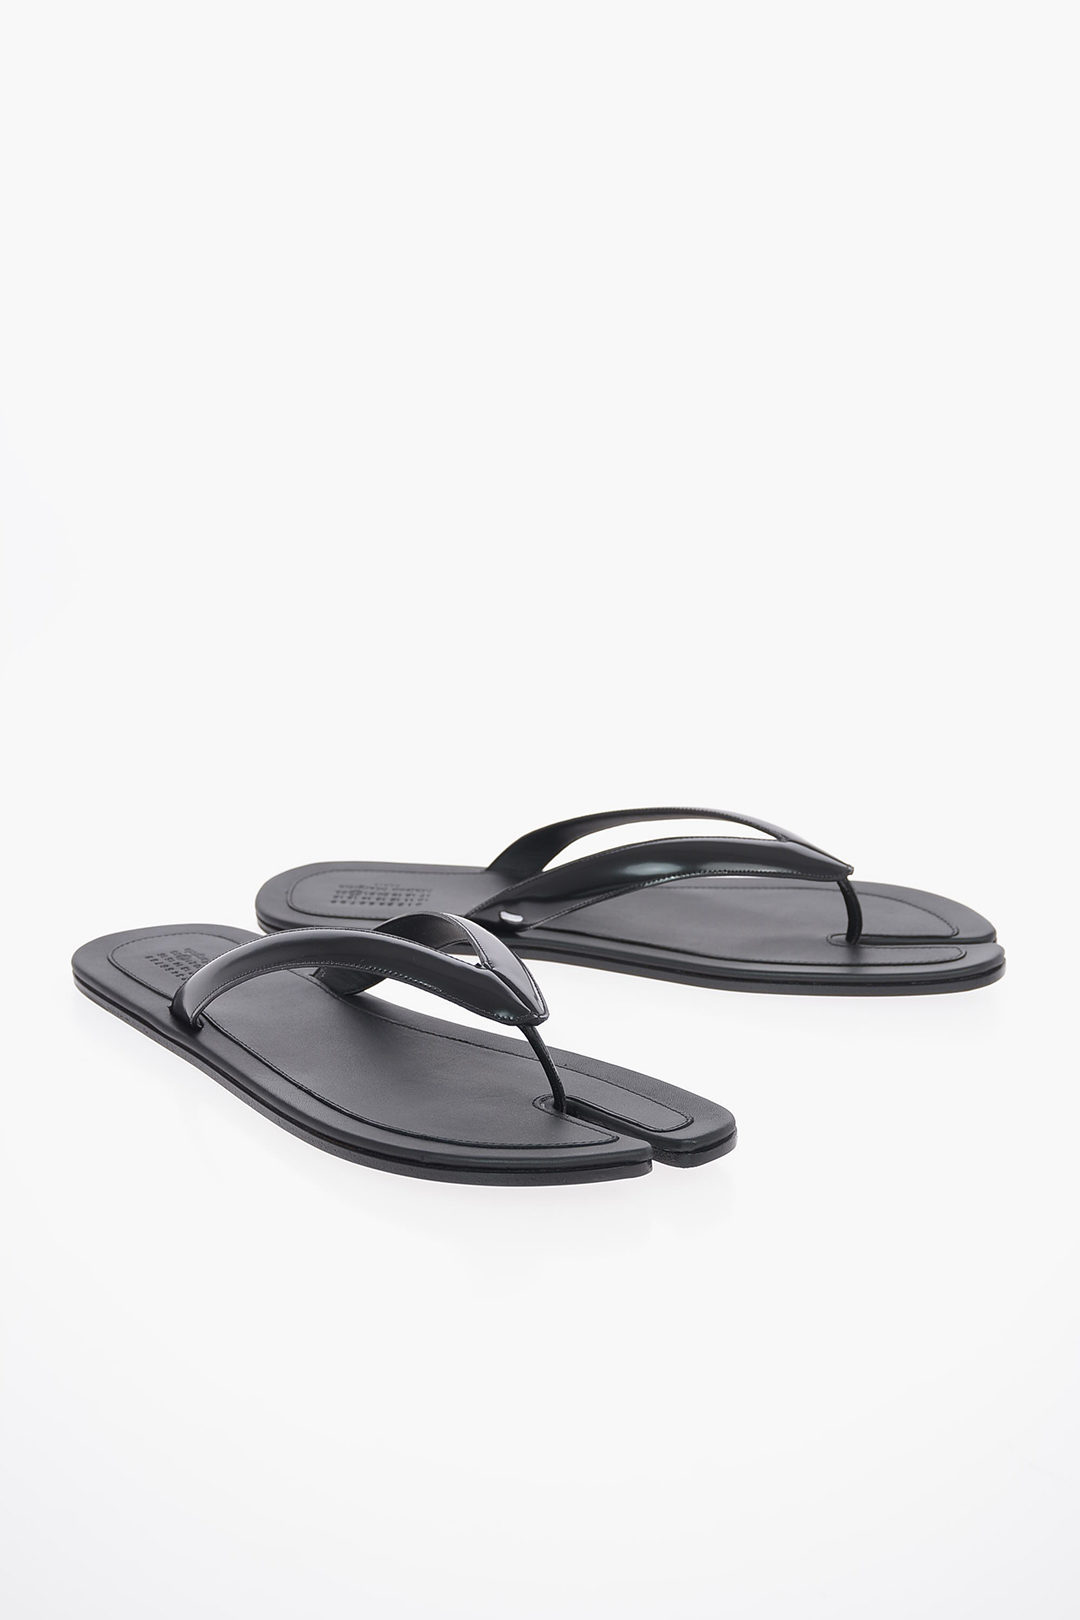 The Drifter - Rugged Handmade Leather Flip Flops for All